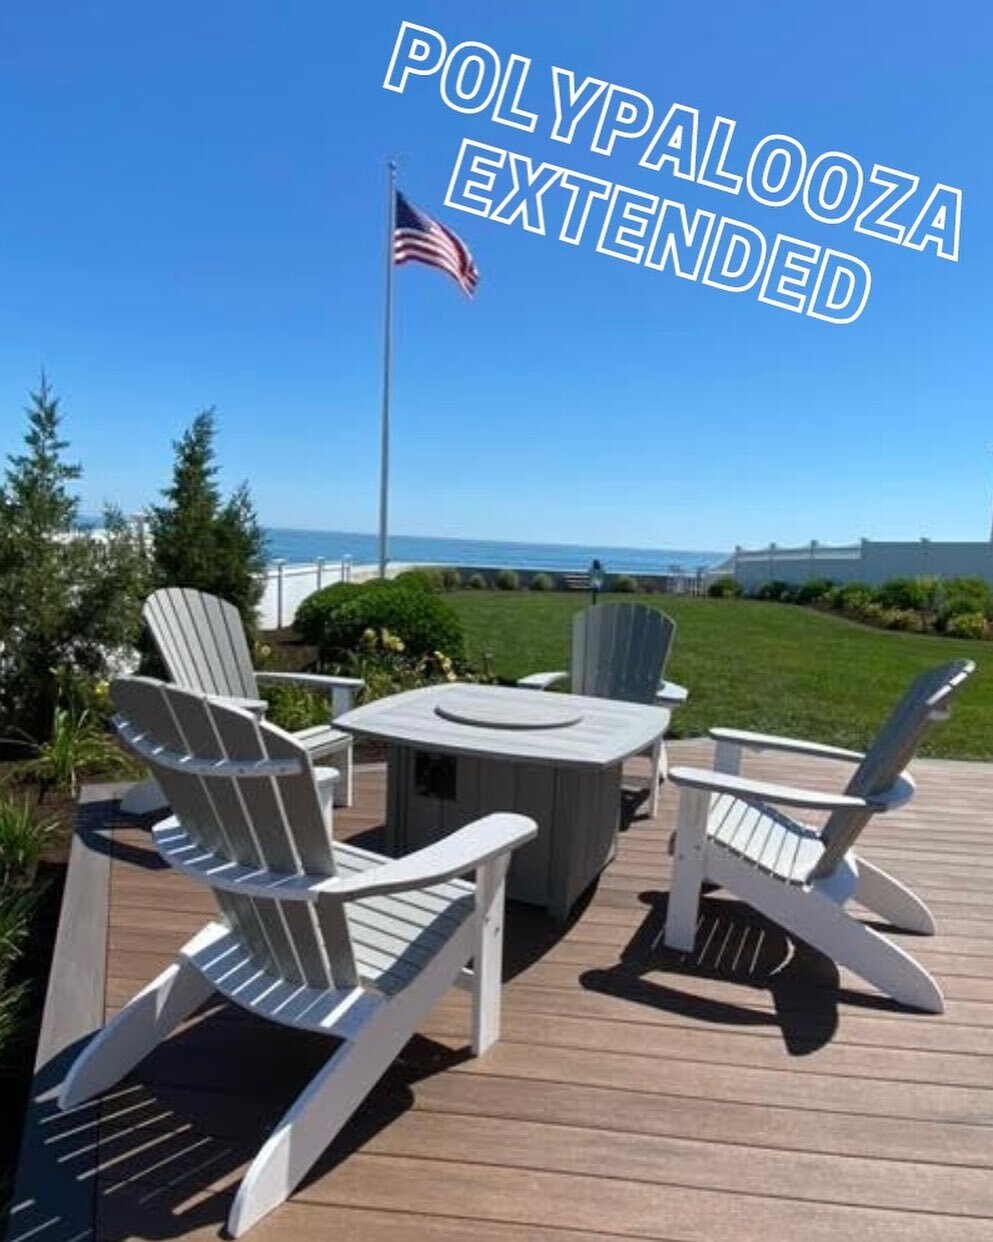 Last chance to shop our largest sale of the year! PolyPalooza extended through Saturday 8/20!!